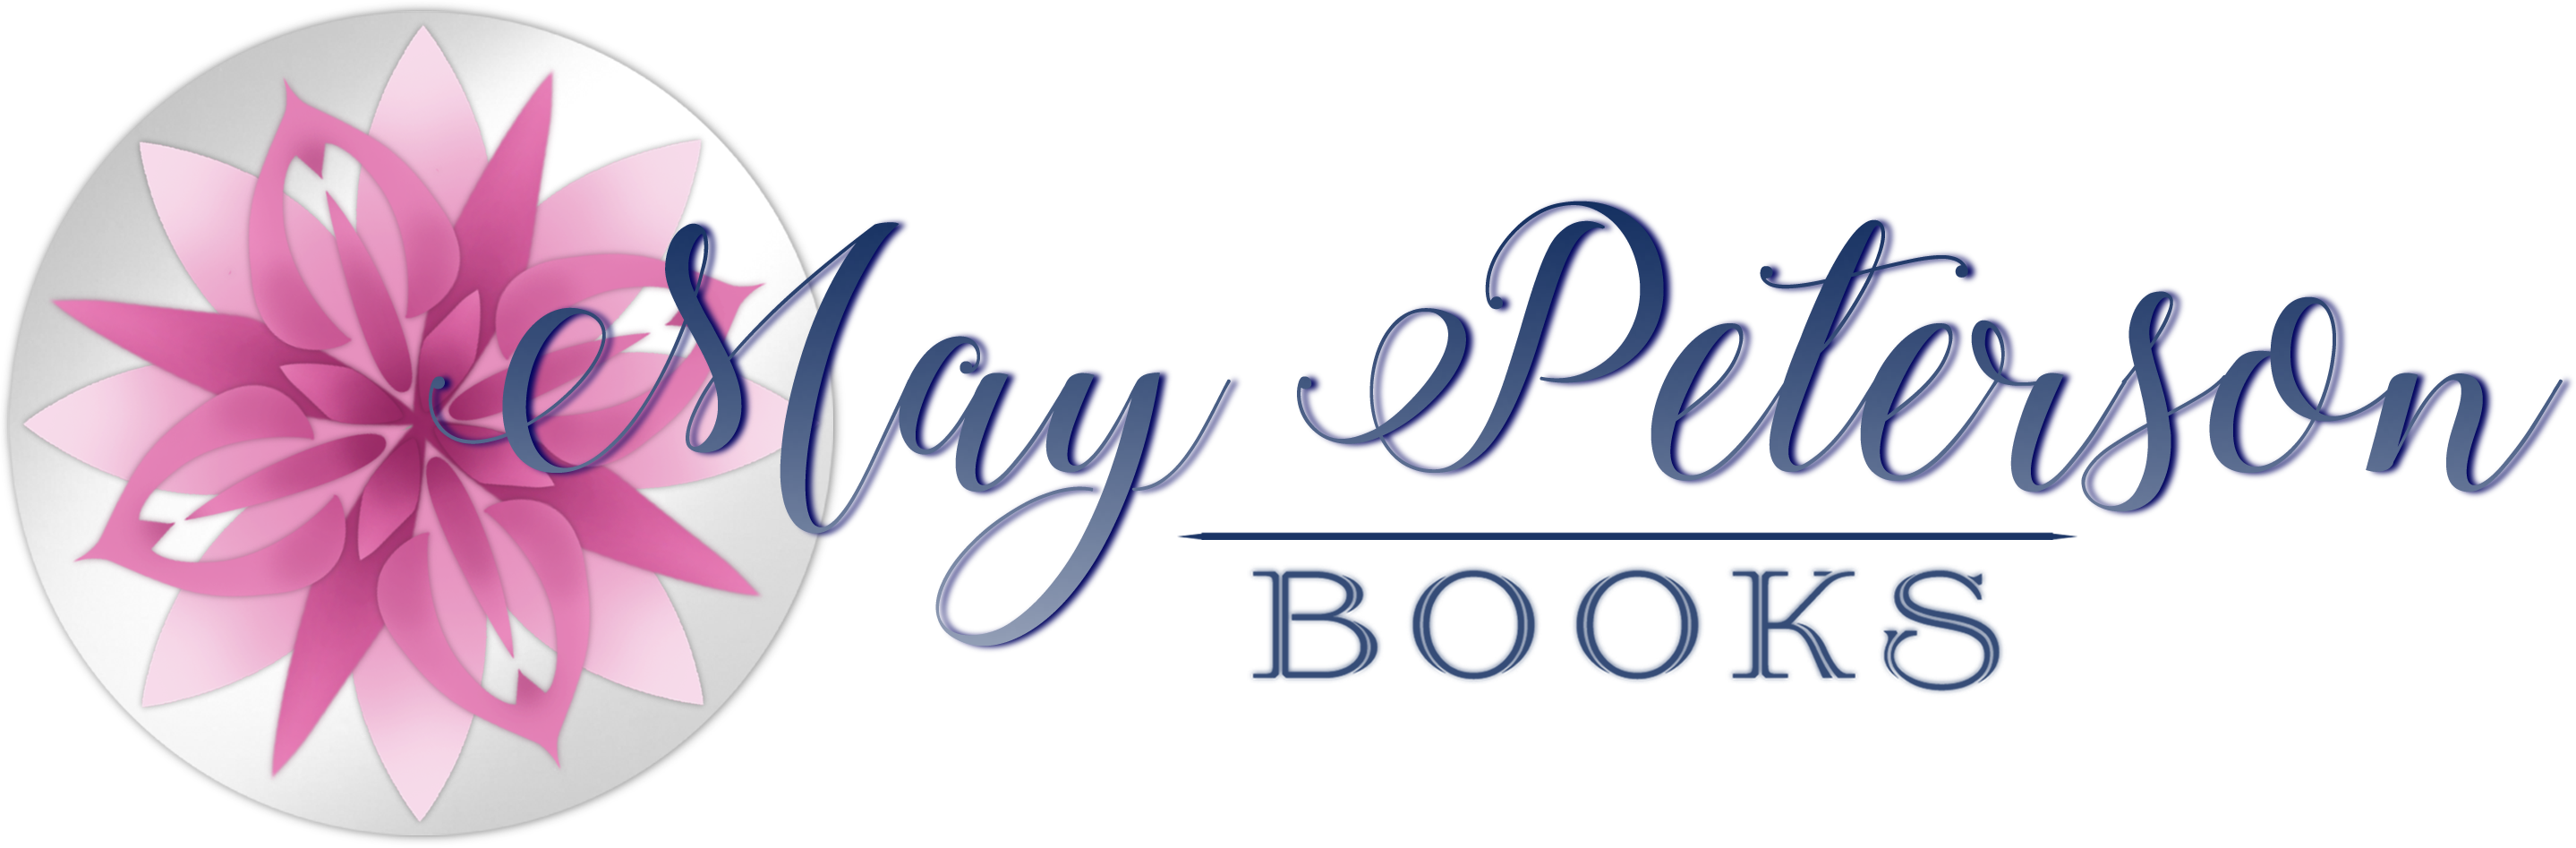 May Peterson Books Logo